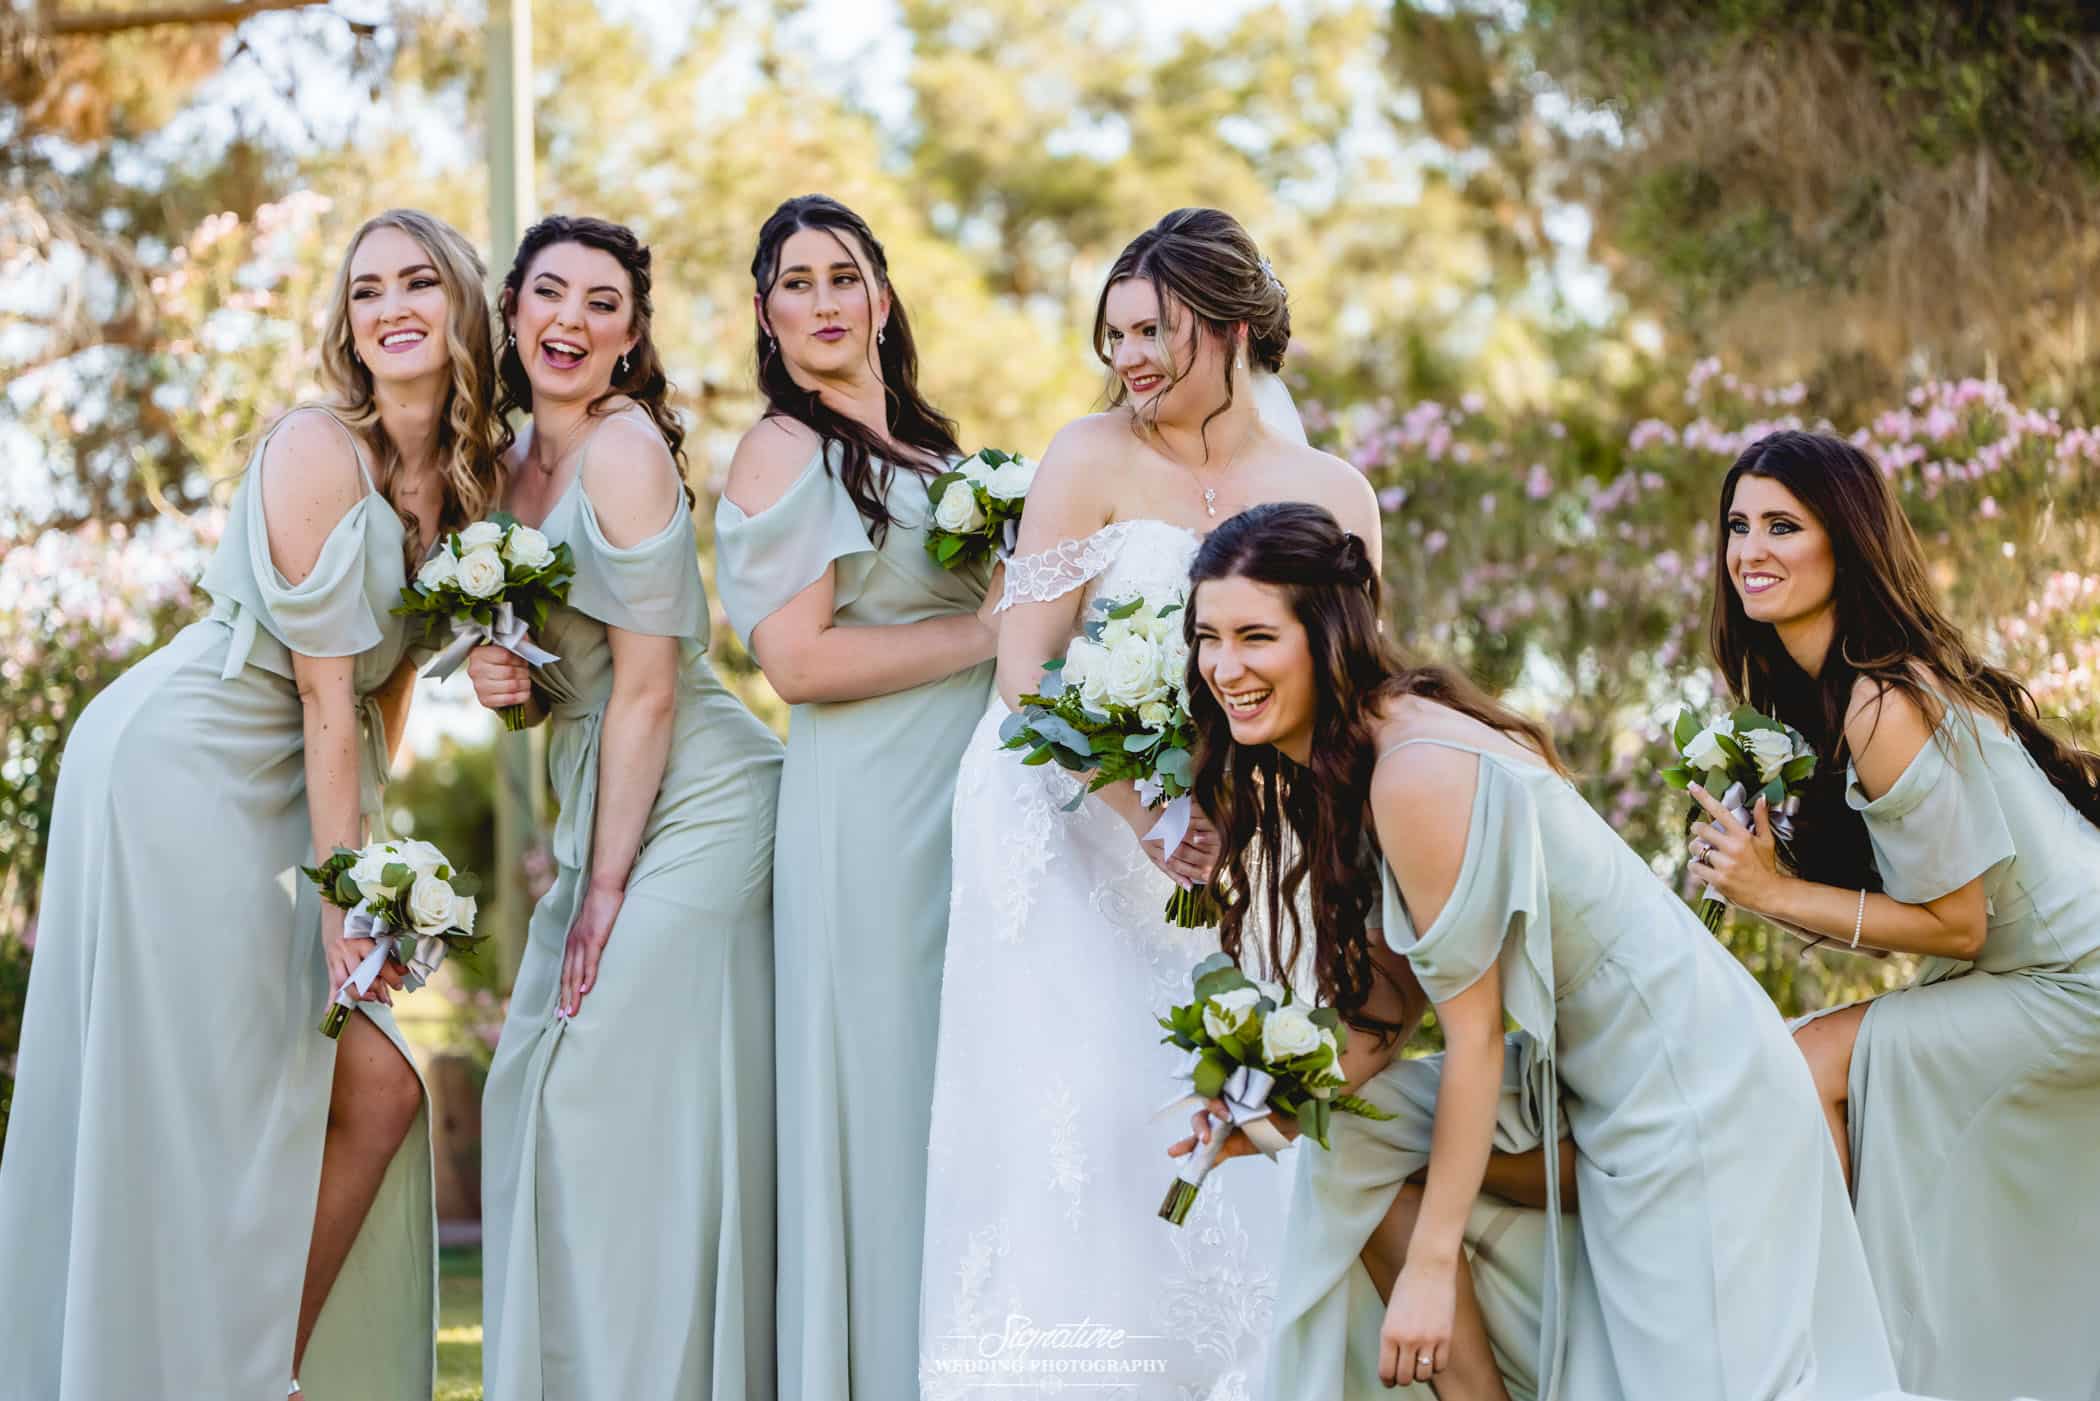 Bride with bridesmaids doing funny poses